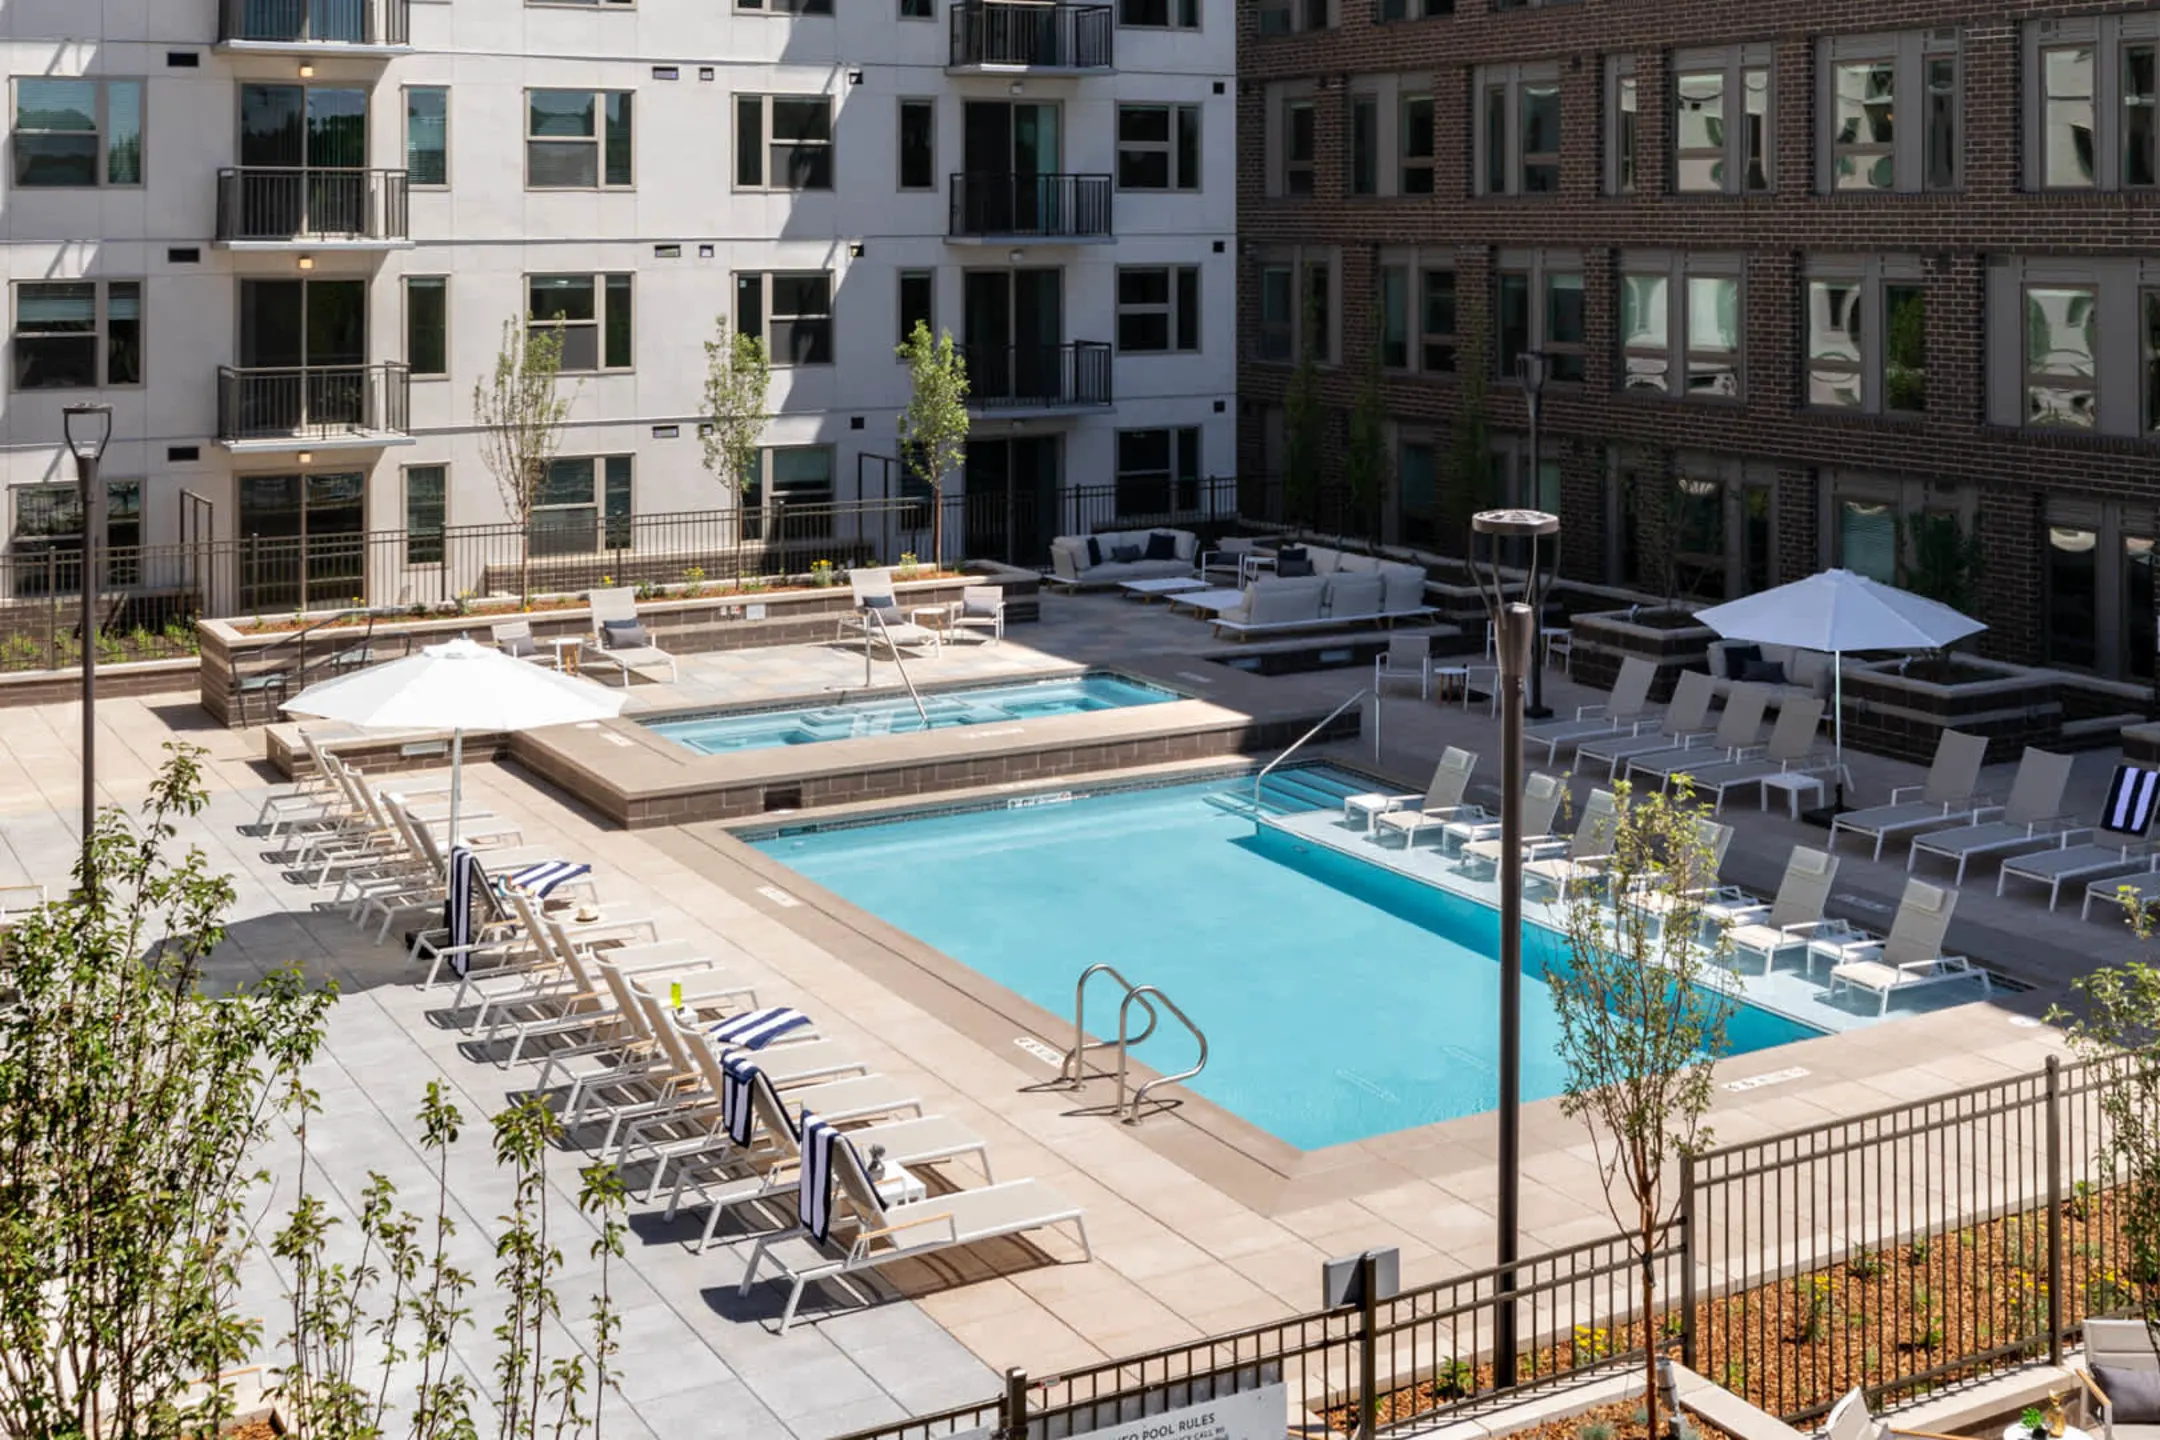 Pool - Theo Apartments - Denver, CO